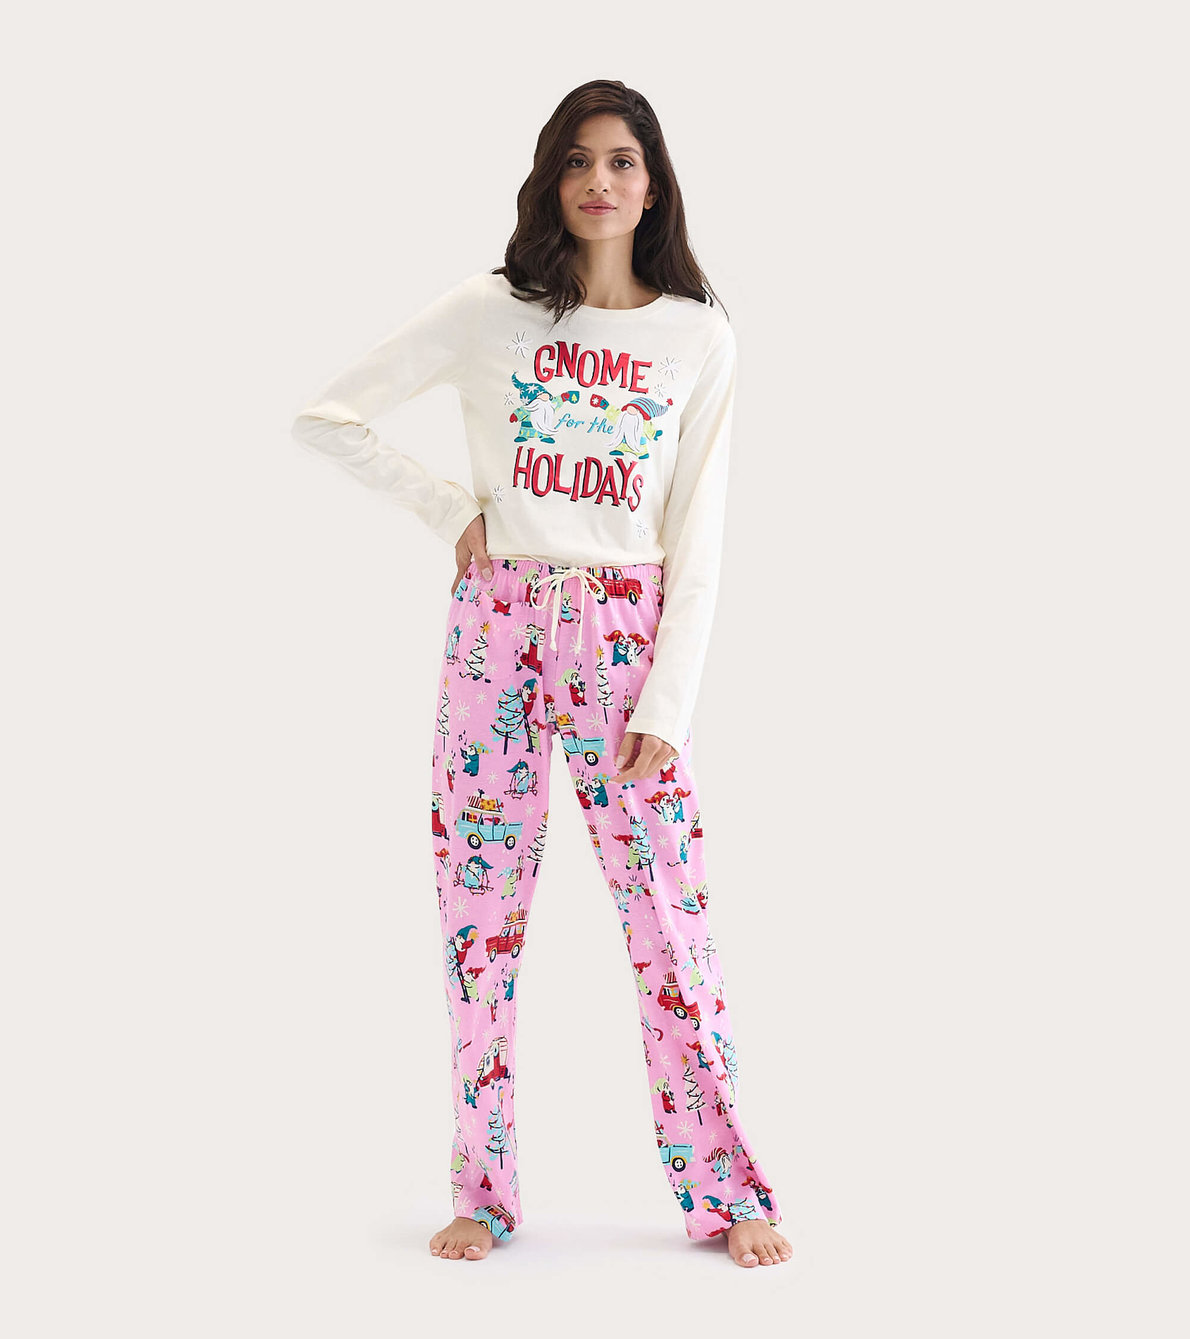 View larger image of Gnome for The Holidays Women's Tee and Pants Pajama Separates